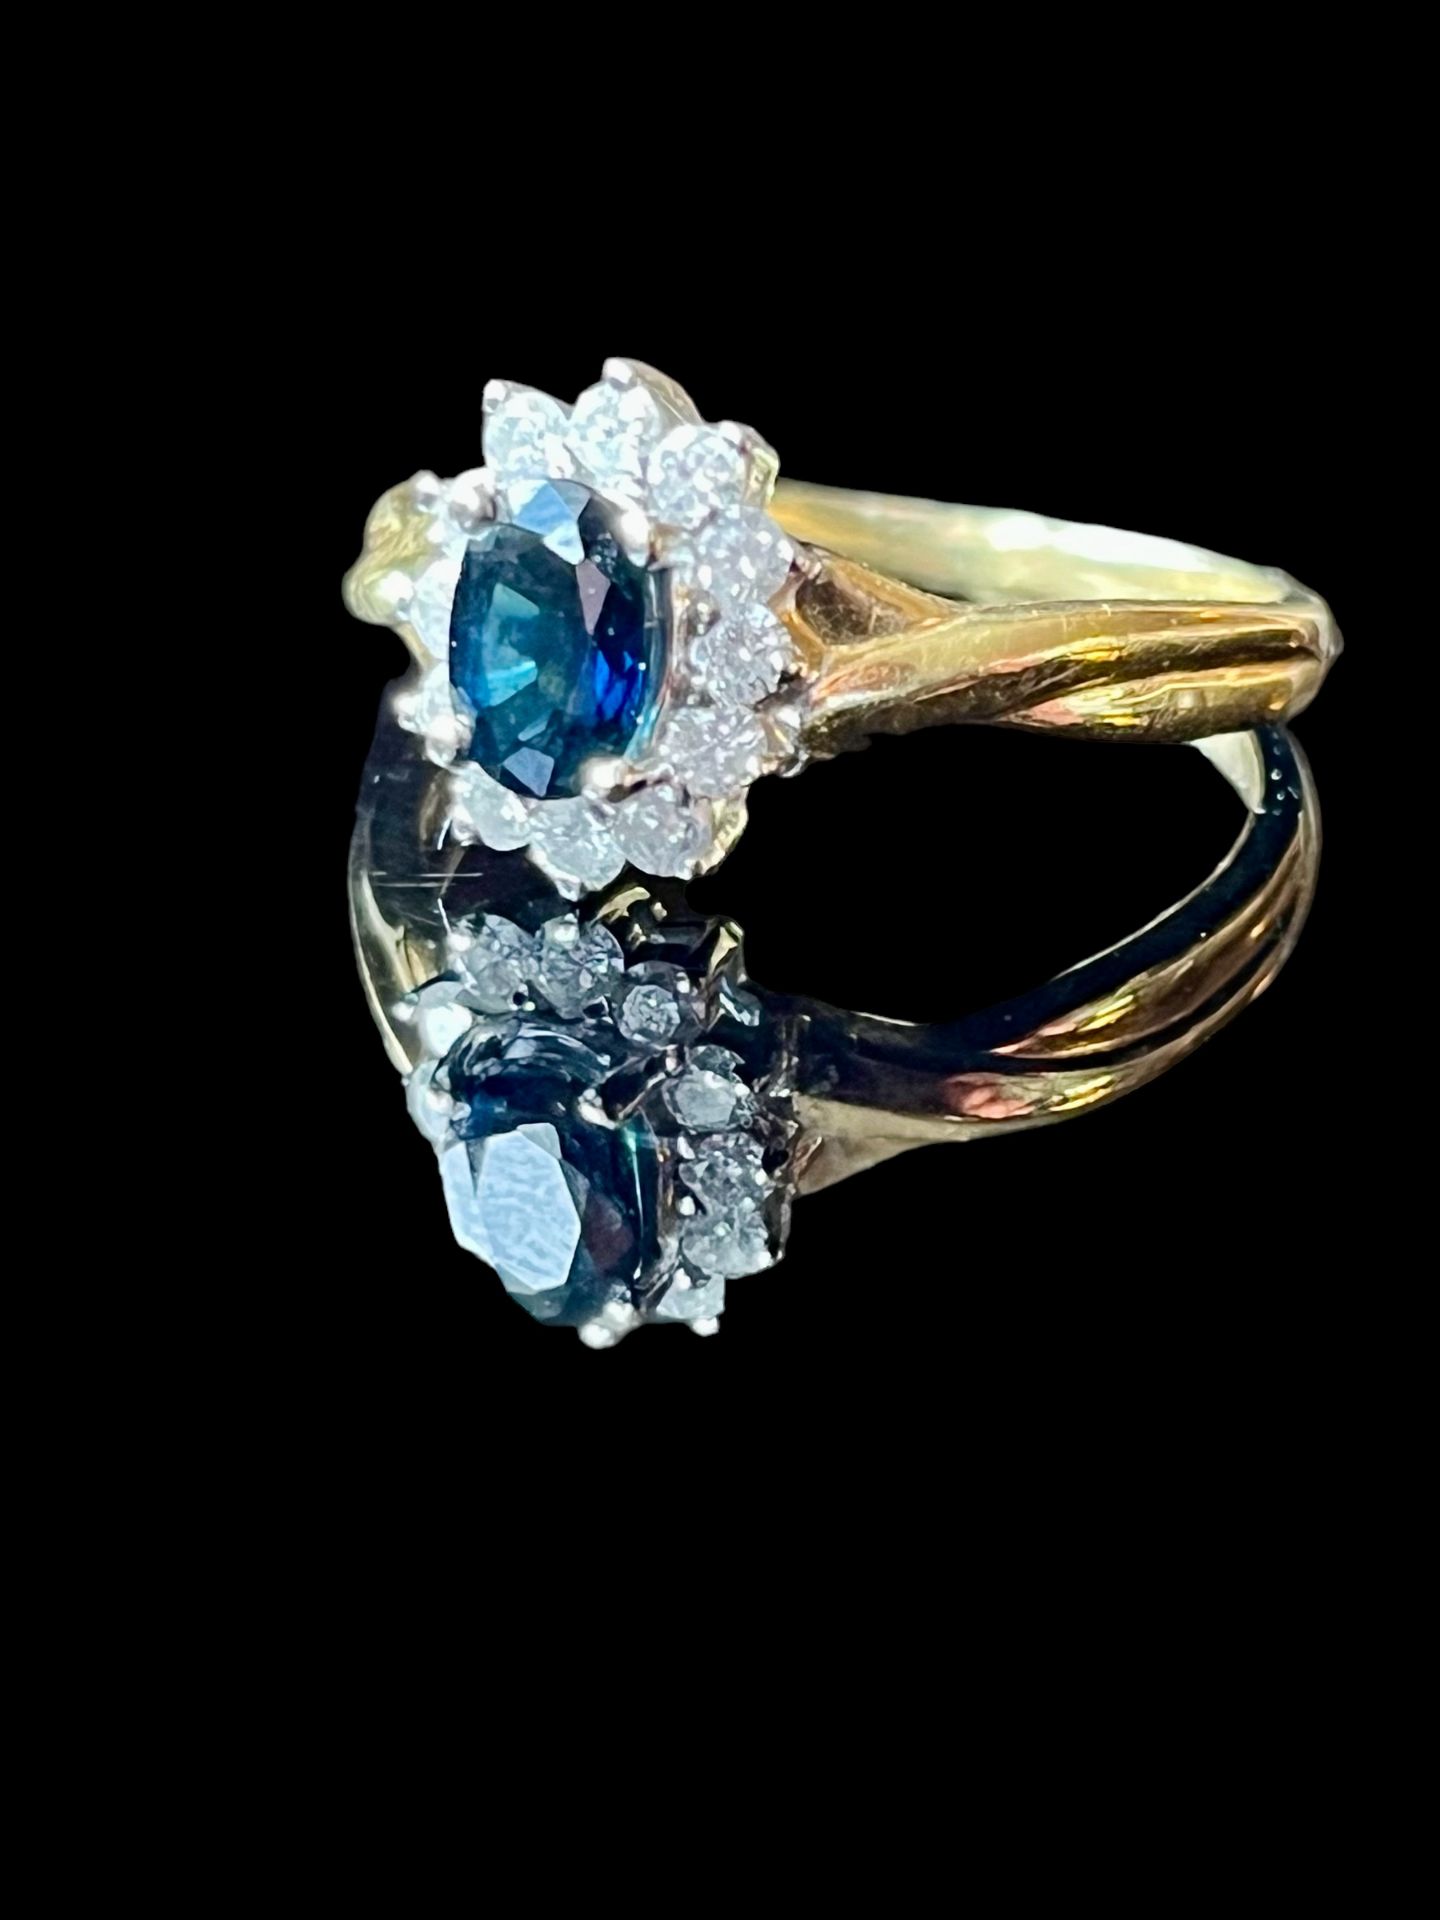 18ct gold, diamond and oval cut sapphire cluster ring, colour (G.I.A scale H) Clarity - Pi, carat